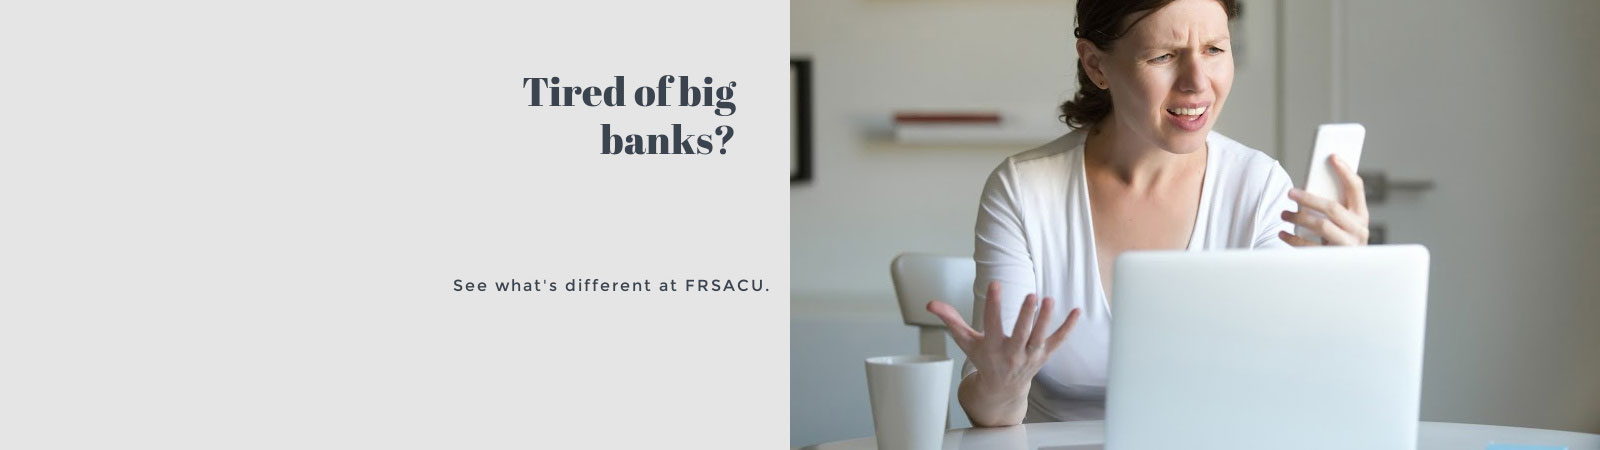 Tired of big banks? See what's different at FRSA